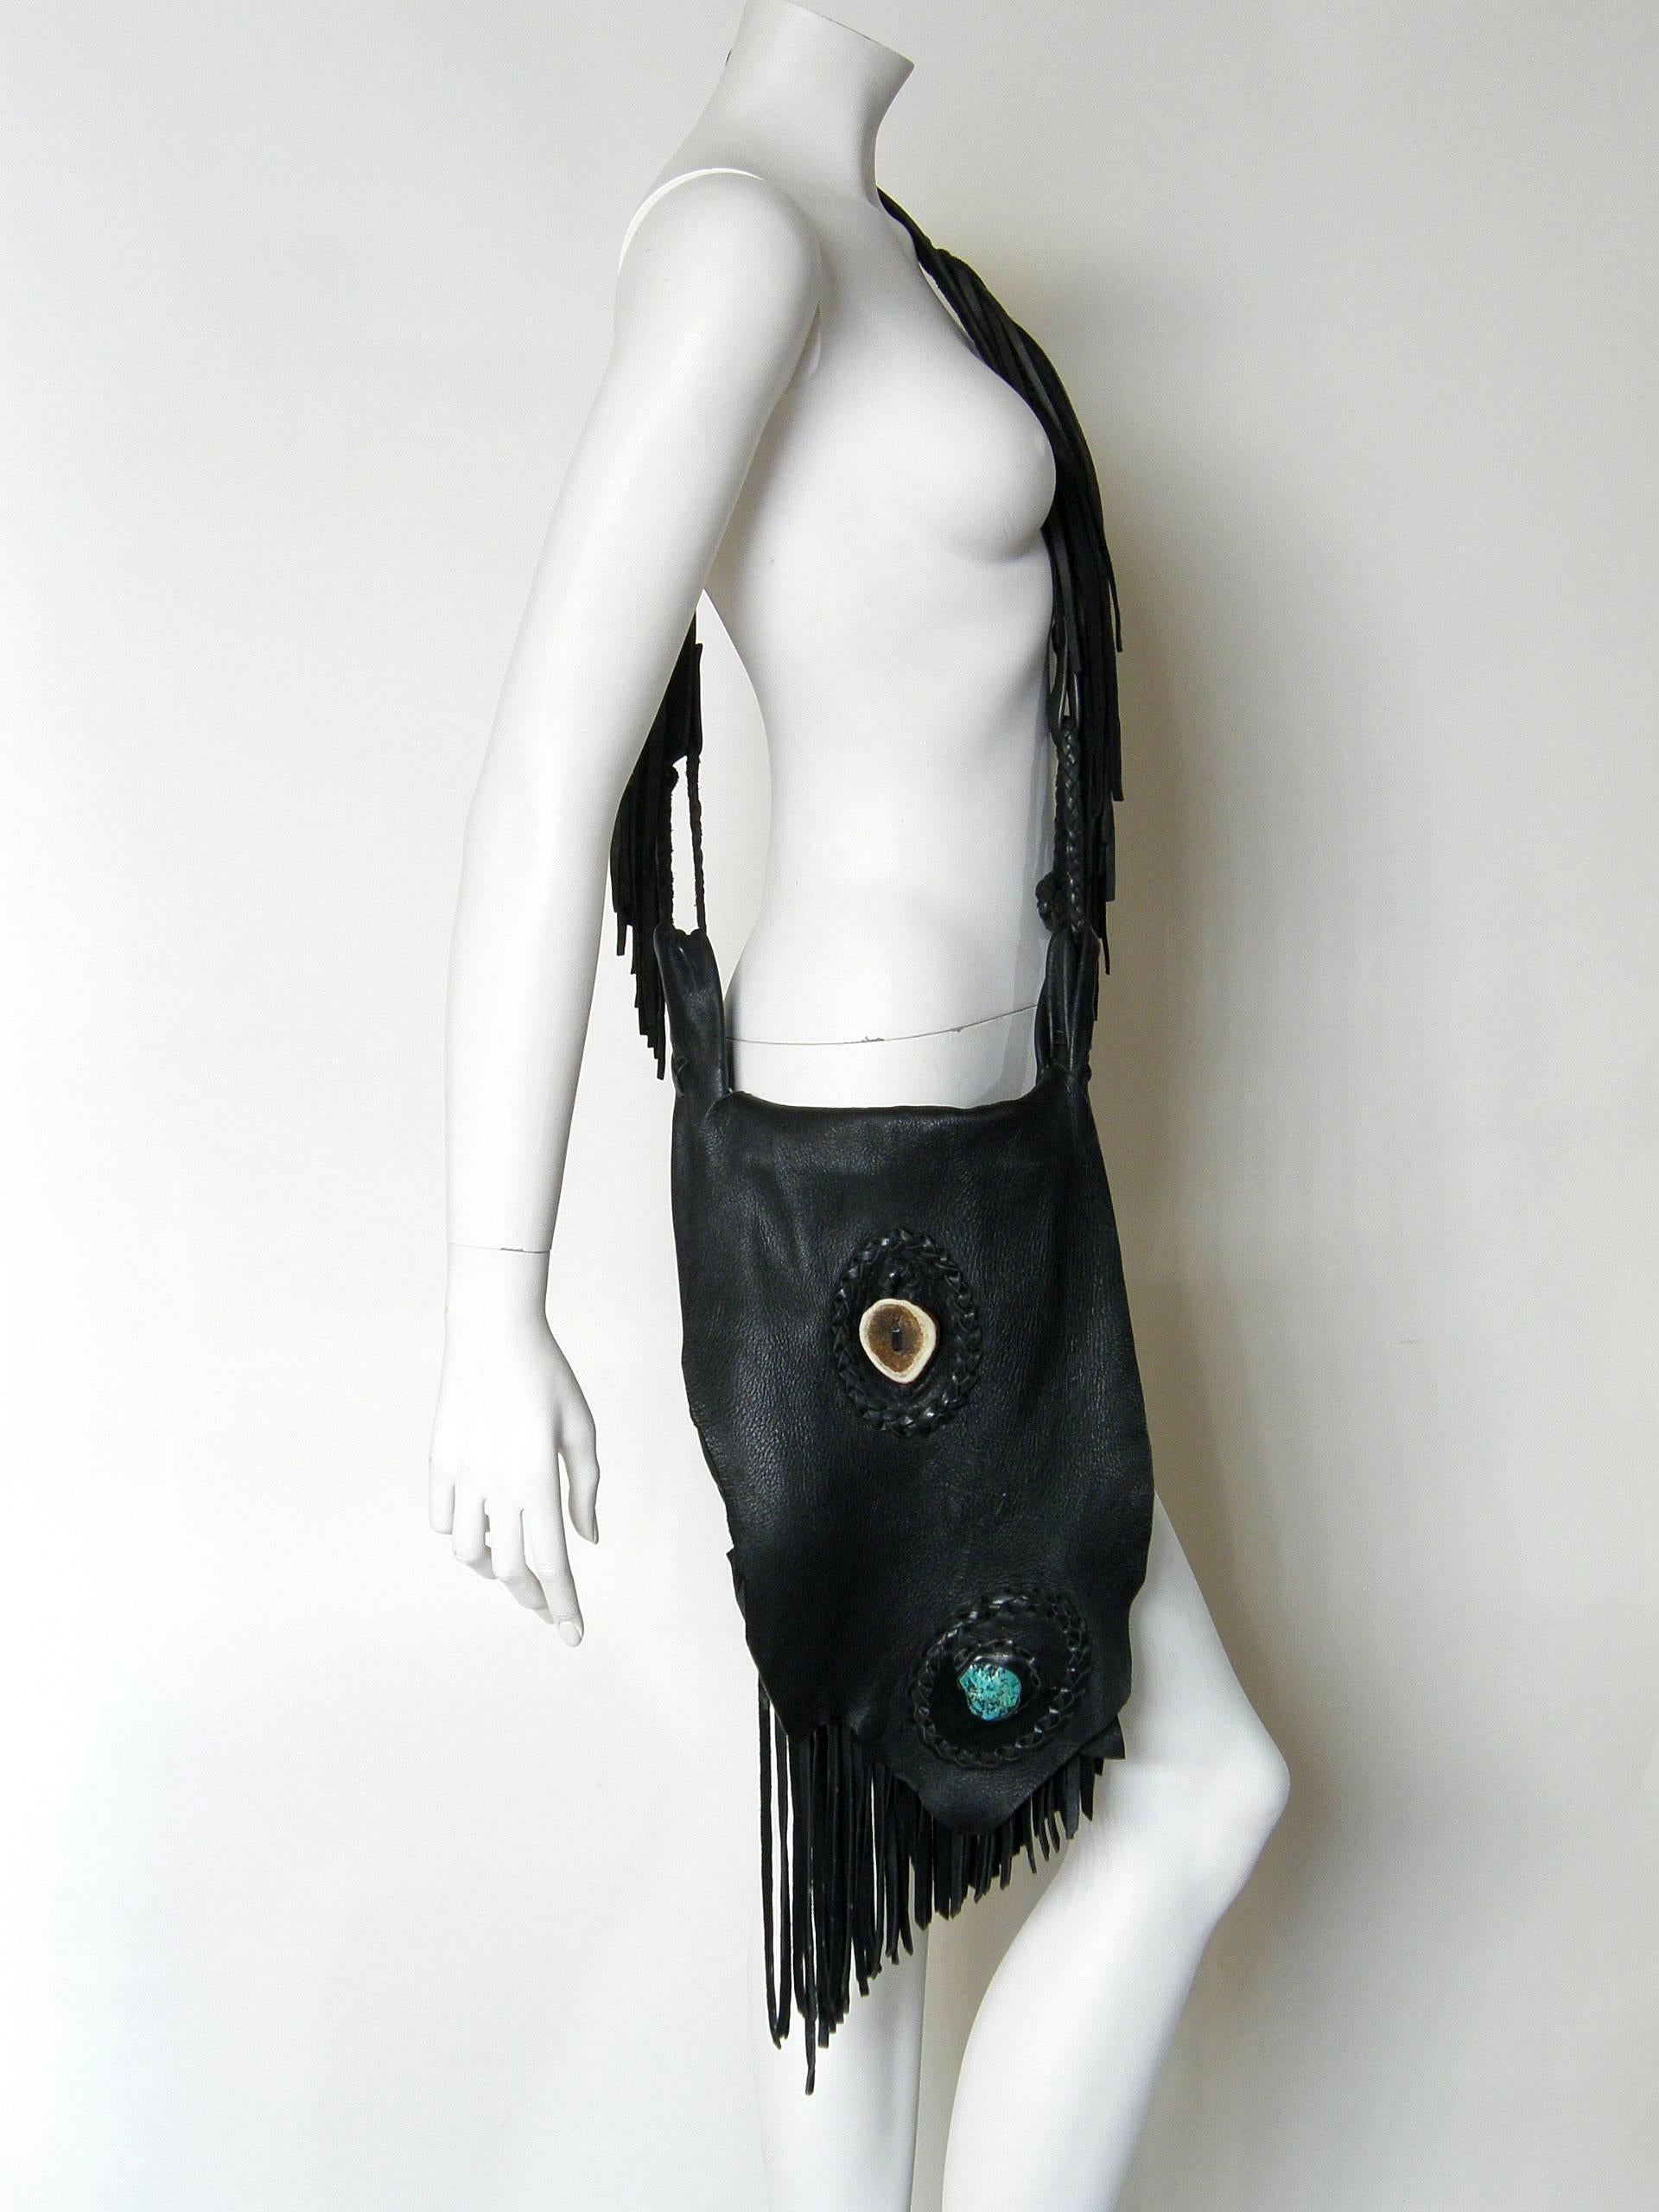 This handcrafted leather shoulder bag is made from wonderfully soft and thick leather with a pebbled finish, probably deerskin. It has a bohemian chic style with a touch of western. The the body of the bag utilizes the irregular edge of the hide to